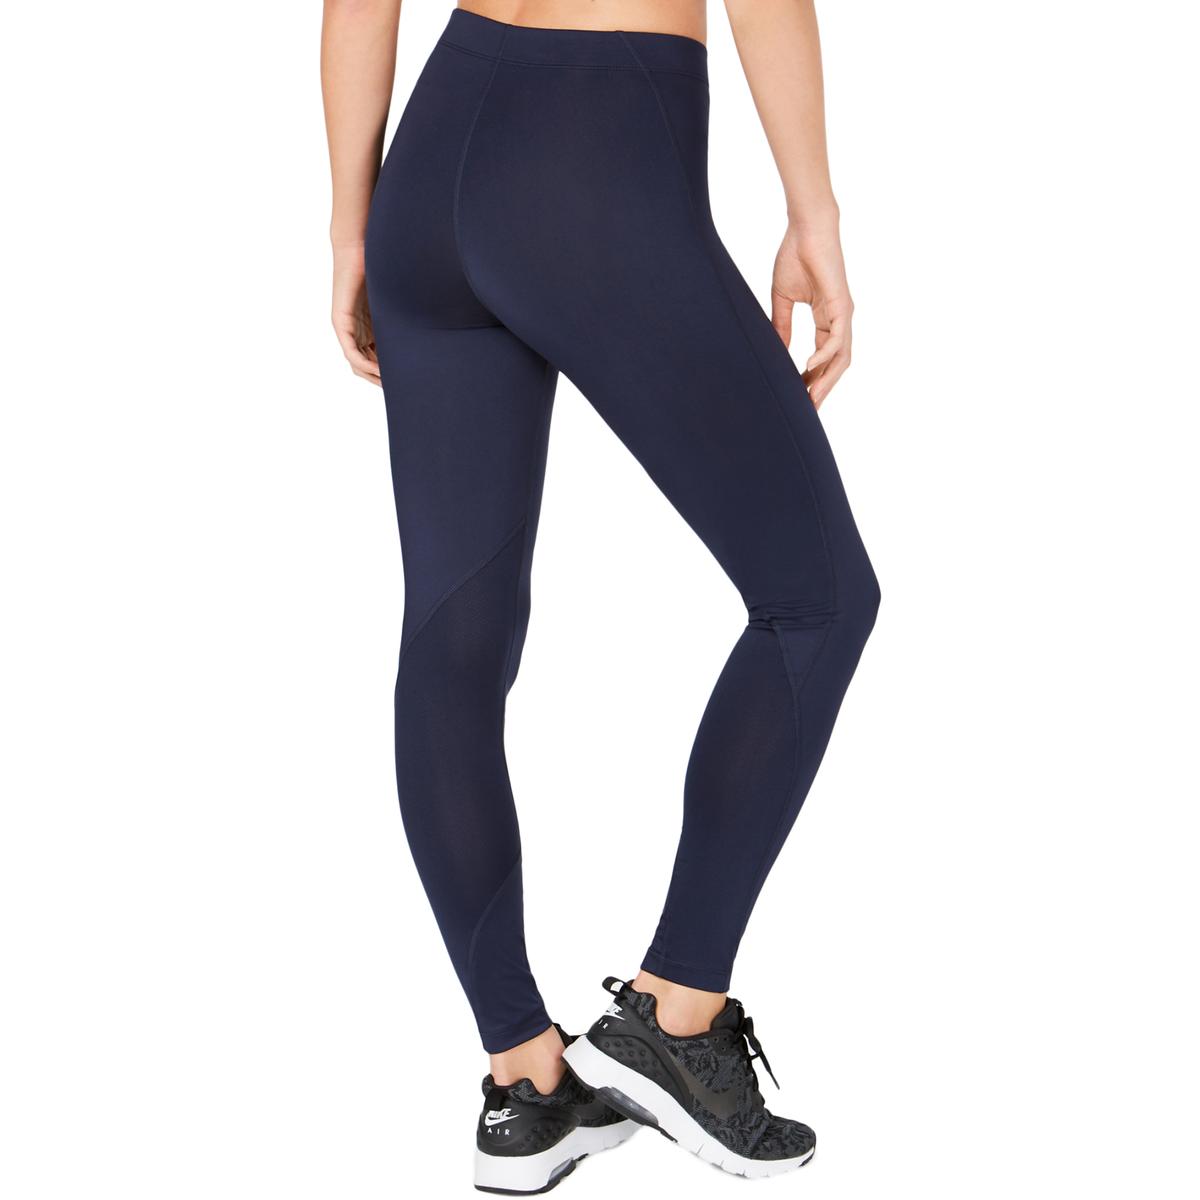 Women's Activewear & Workout Clothes on Clearance